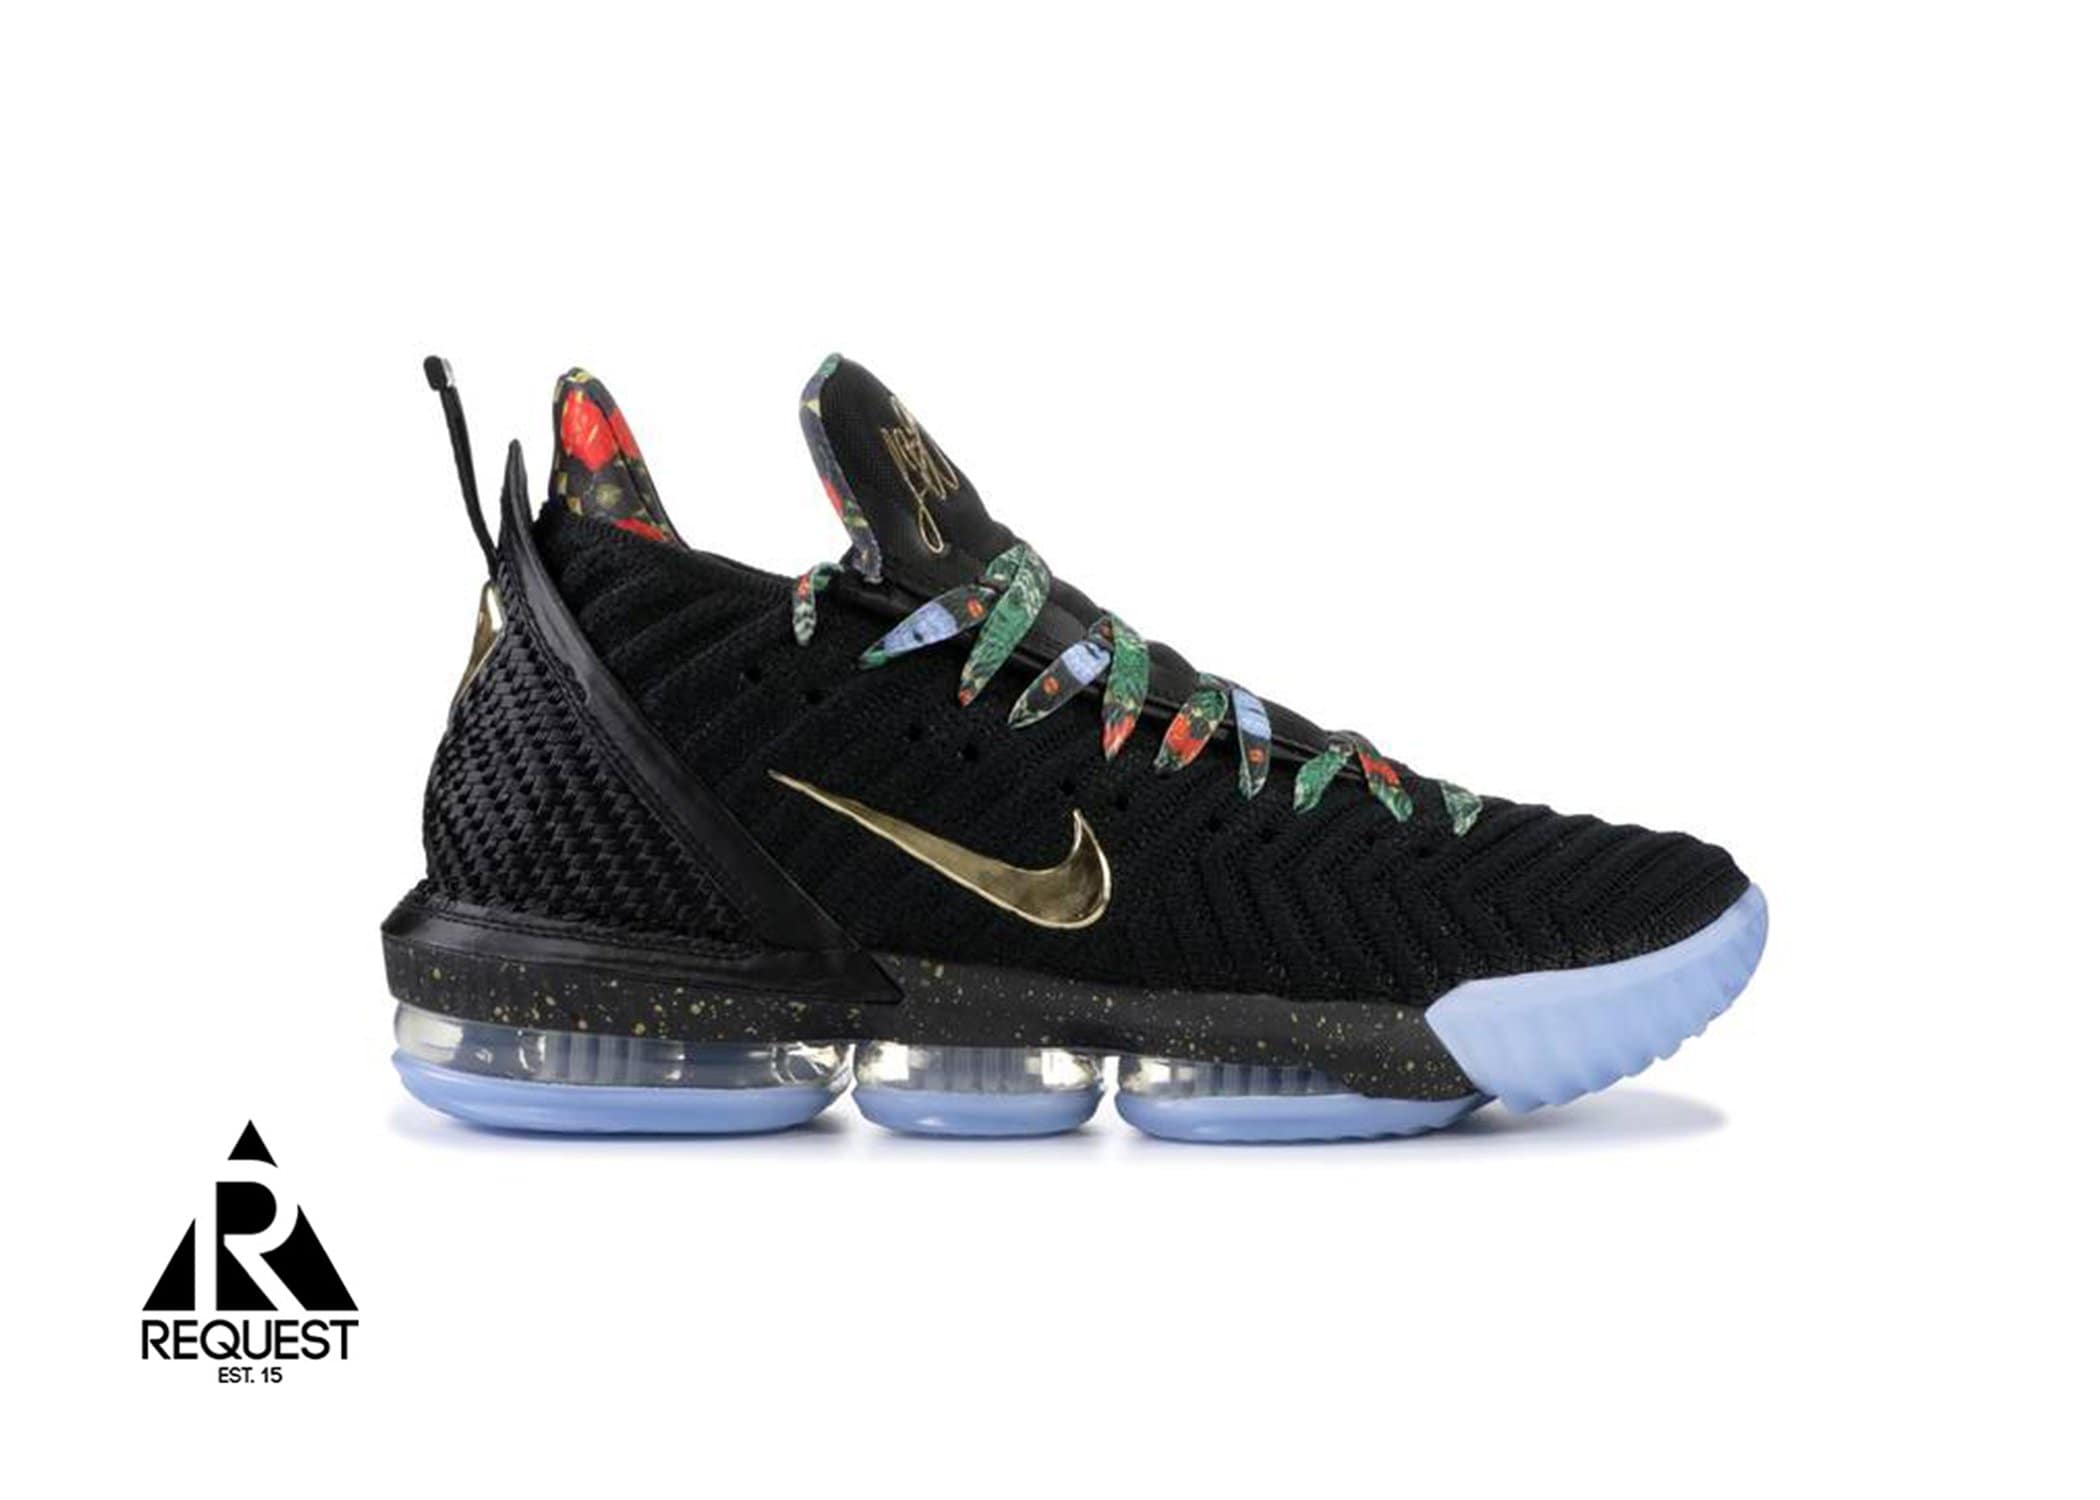 Lebron 16 “Watch The Throne”